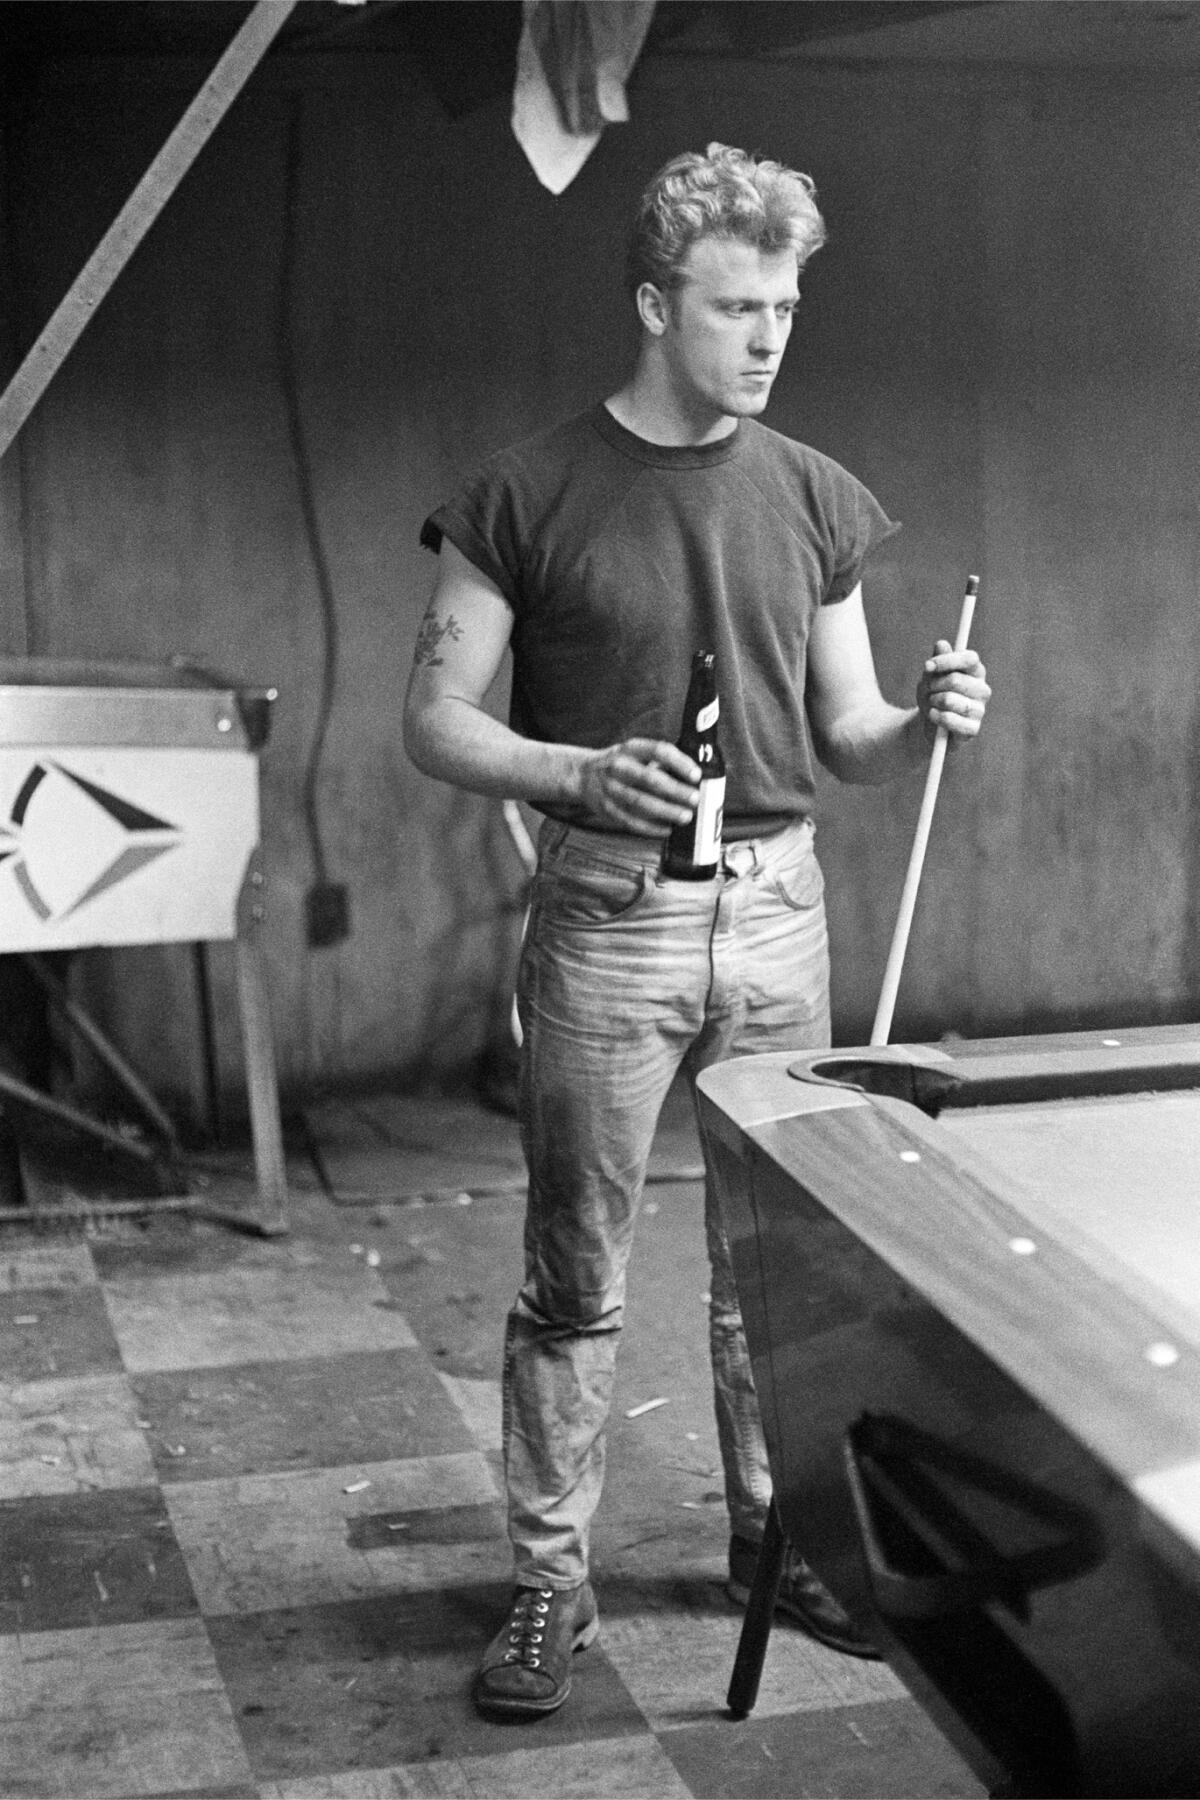 A man with a beer plays pool.